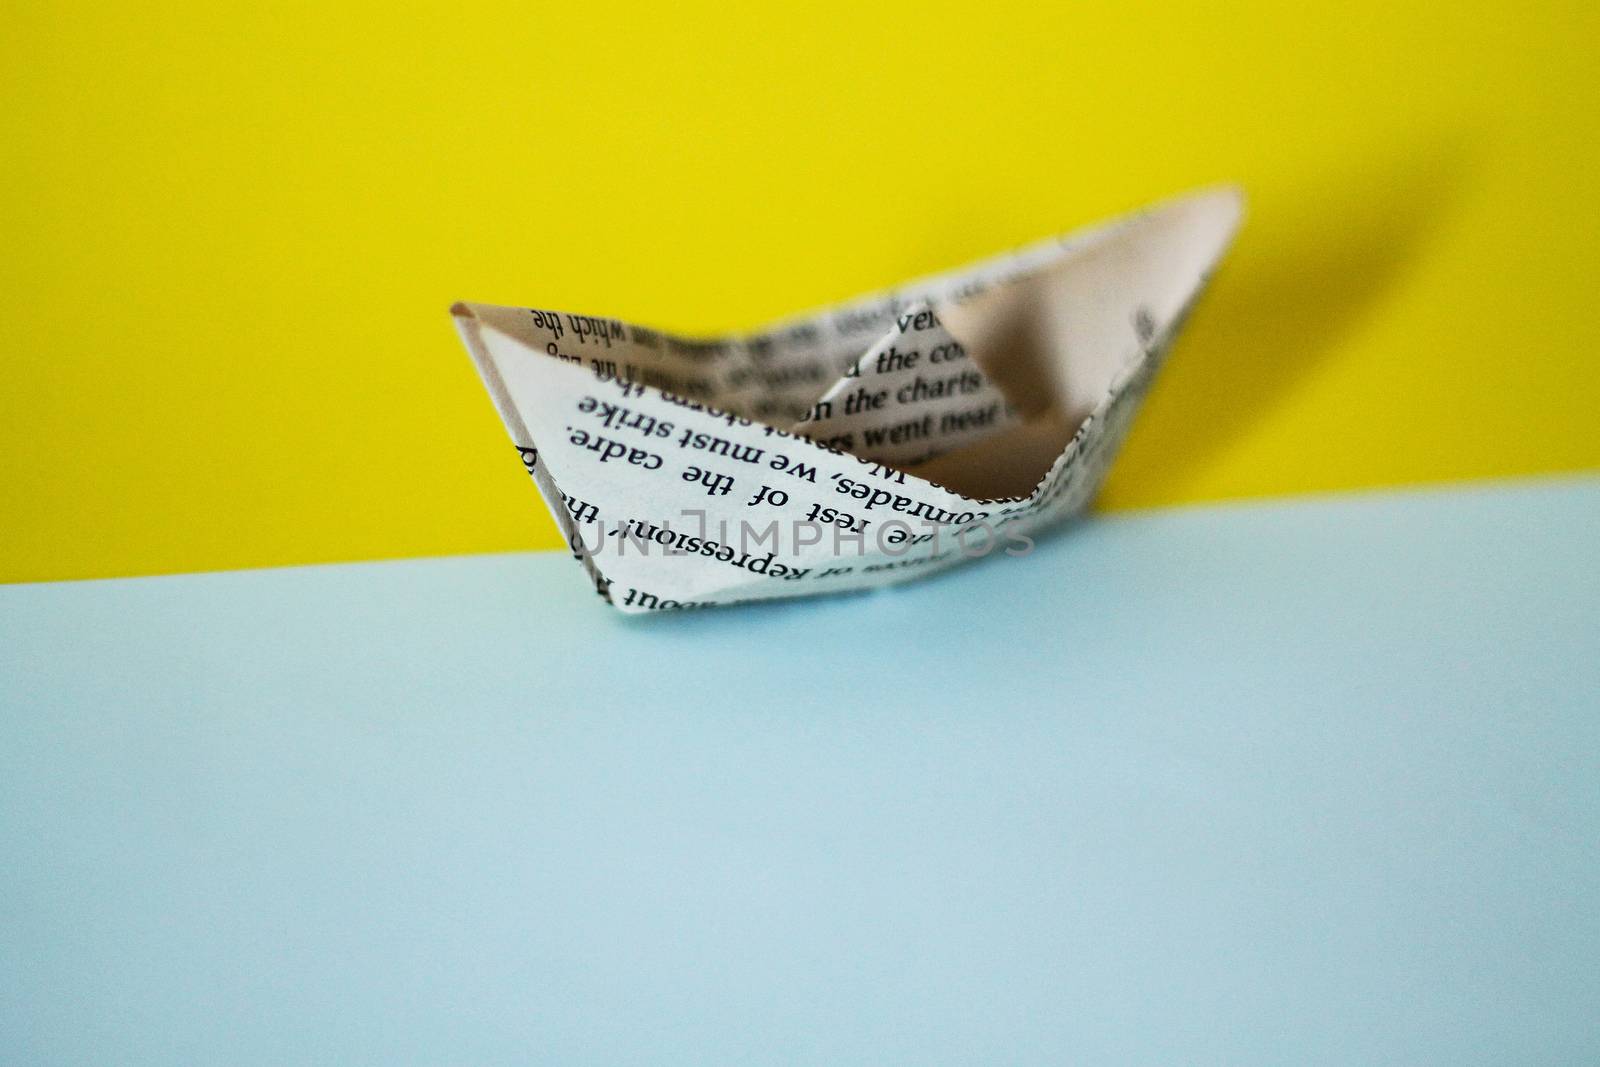 A paper boat made from old newspaper page against blue colored paper showing the concept of childhood dream, aspirations, hope and finances